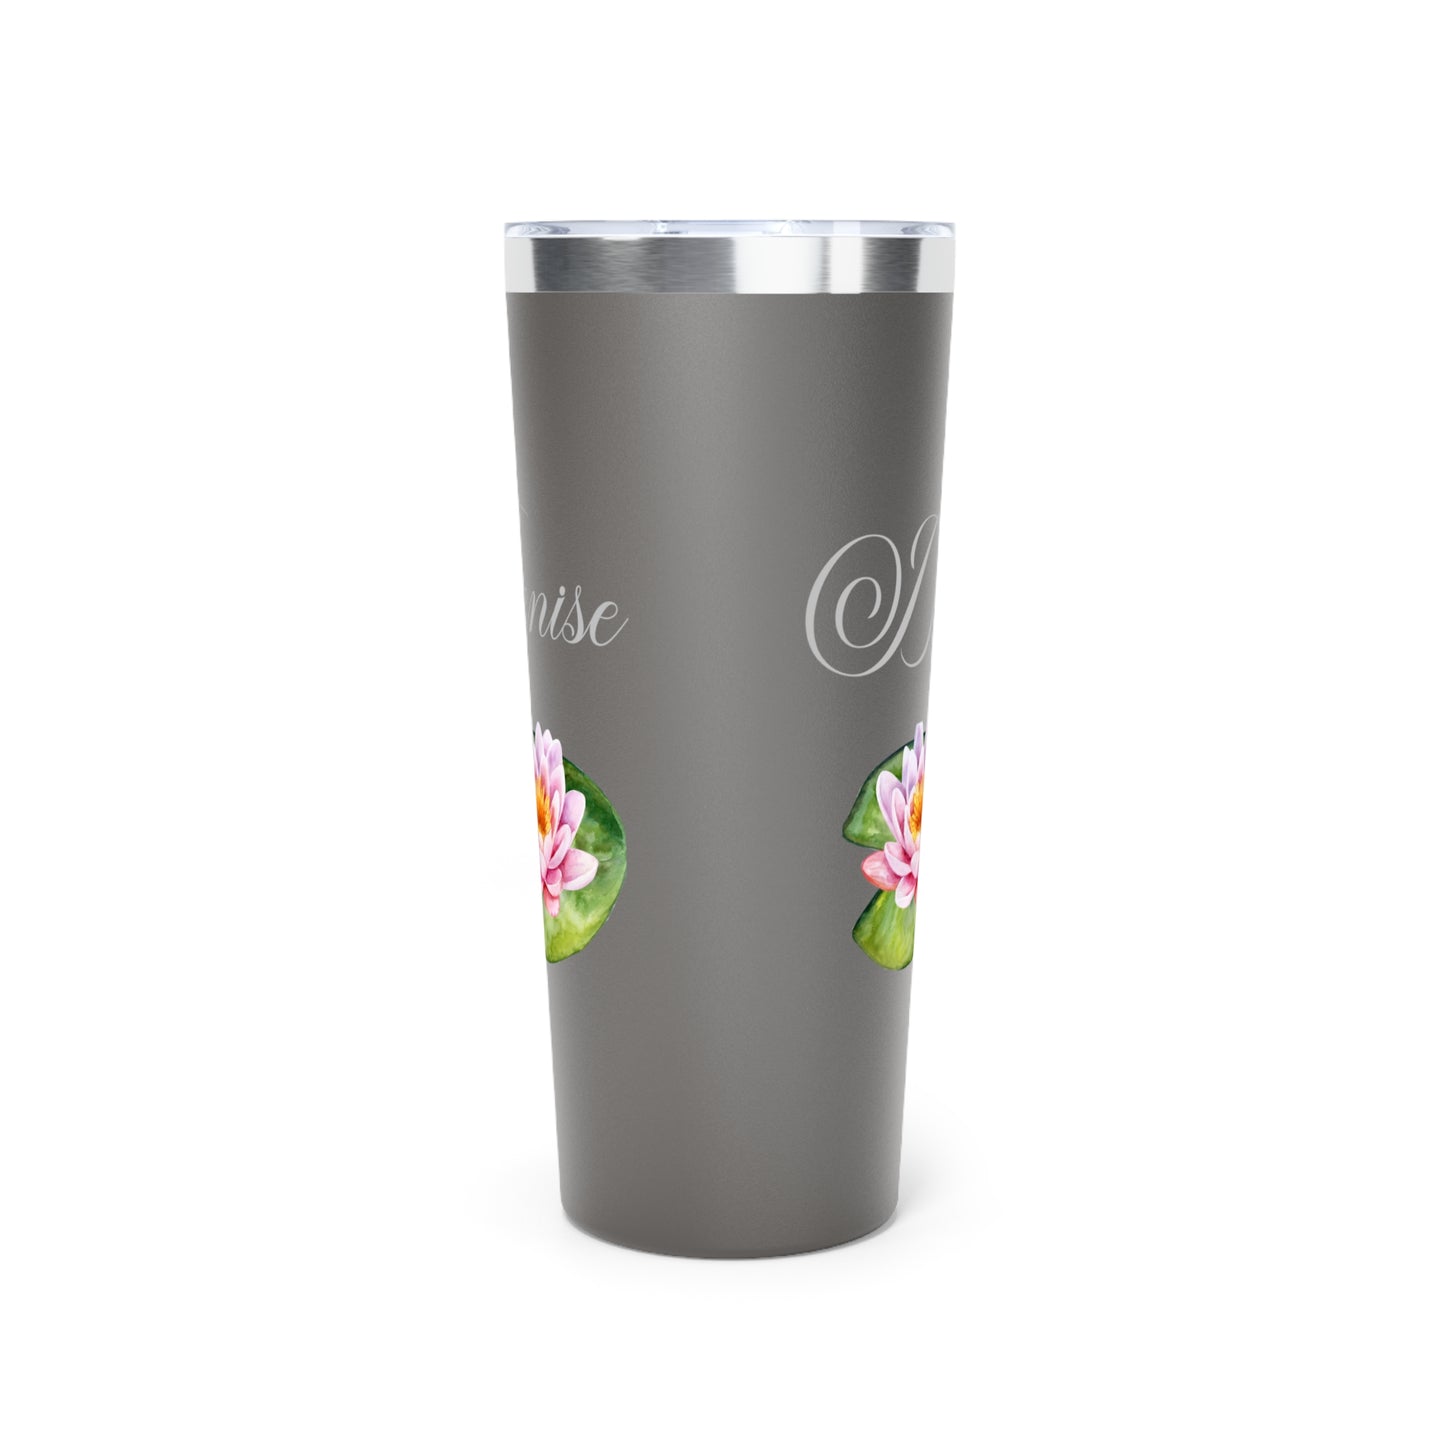 July Personalized Birth Flower Tumbler, Personalized Birth Flower Coffee Cup With Name, Gifts for Her, Bridesmaid Proposal, Party Favor